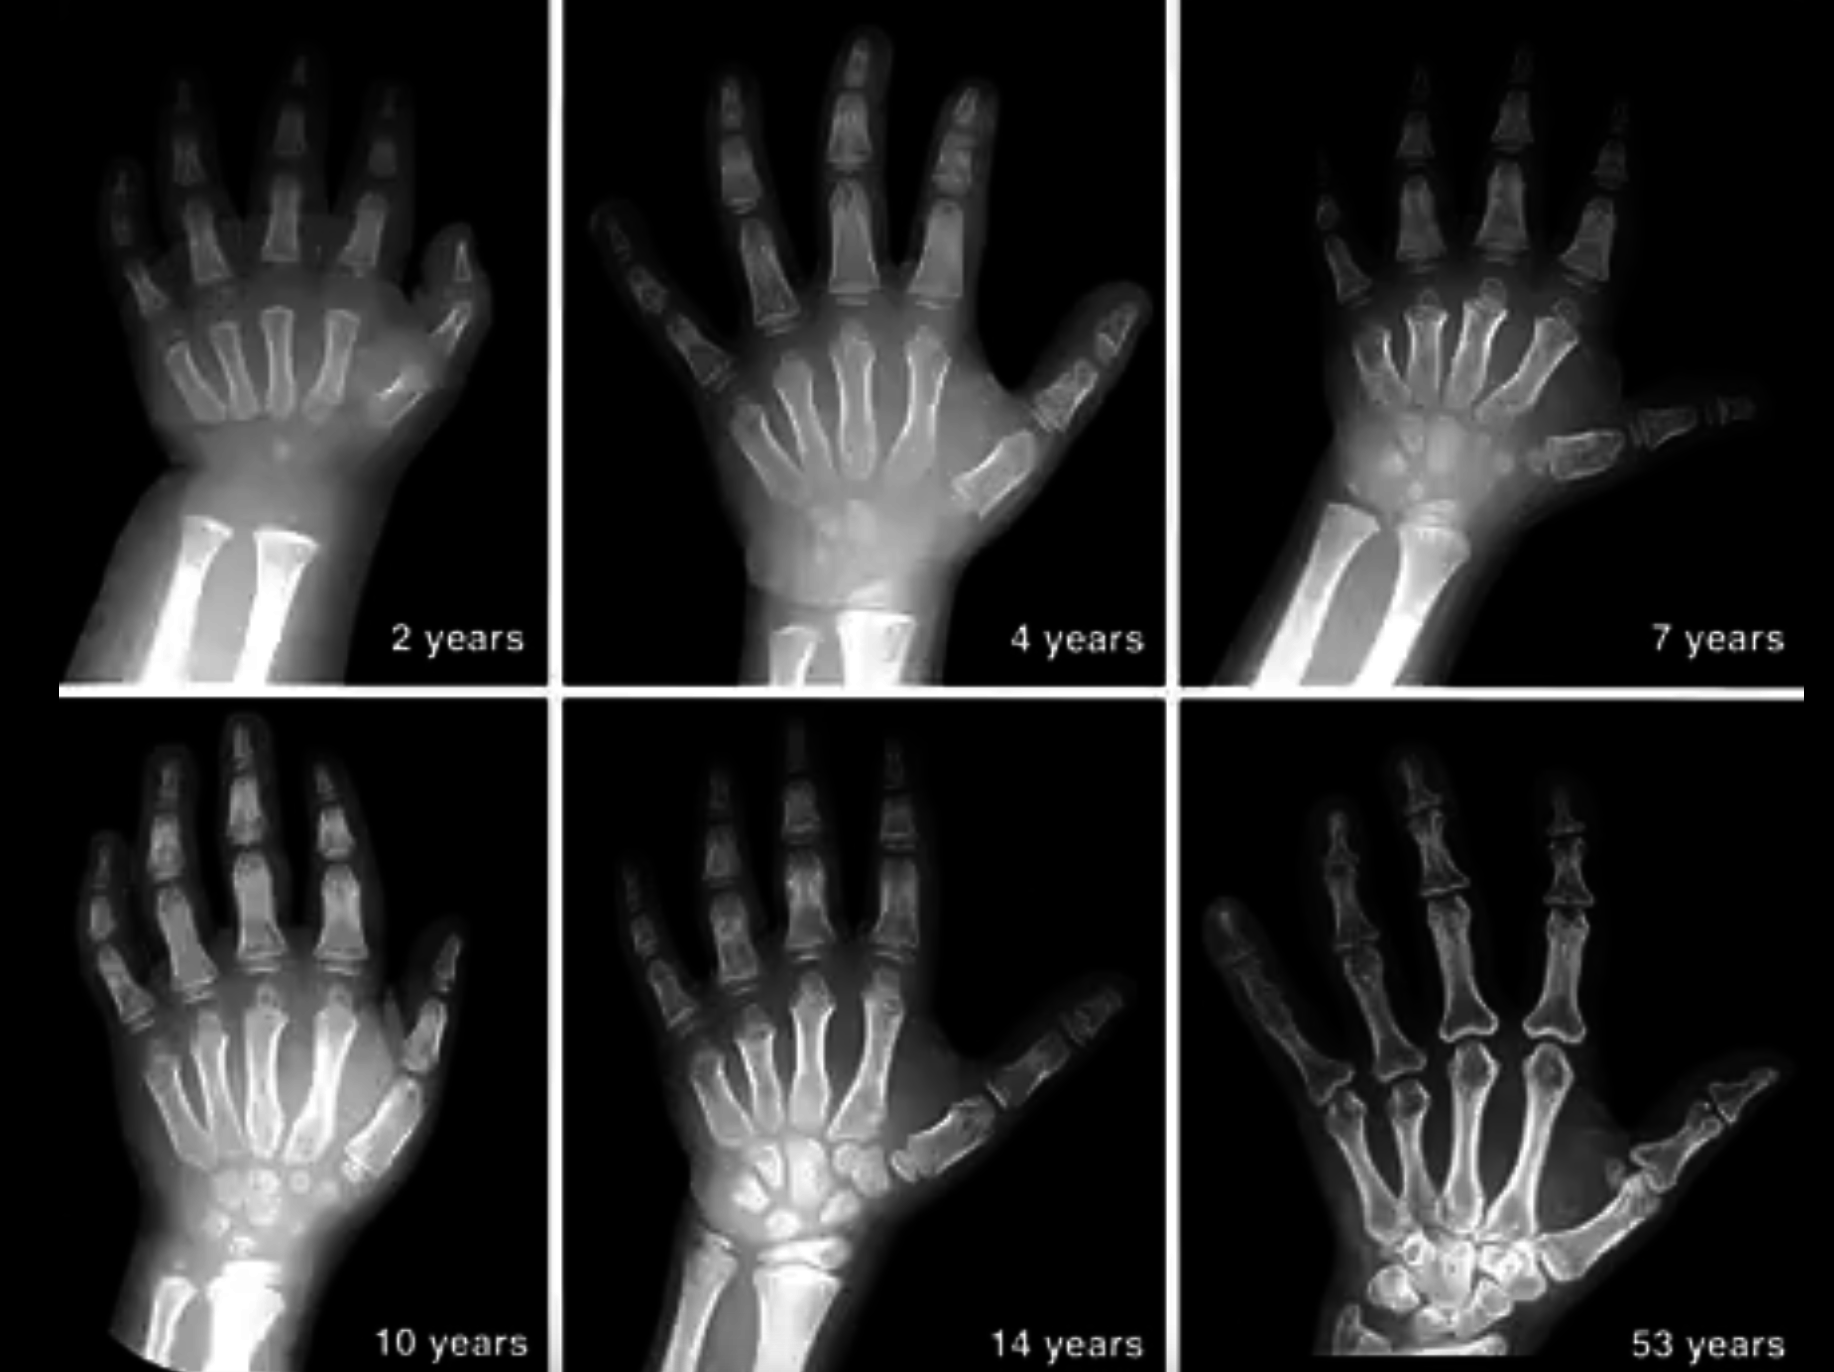 X-ray images of a human hand at different ages showing bone development stages